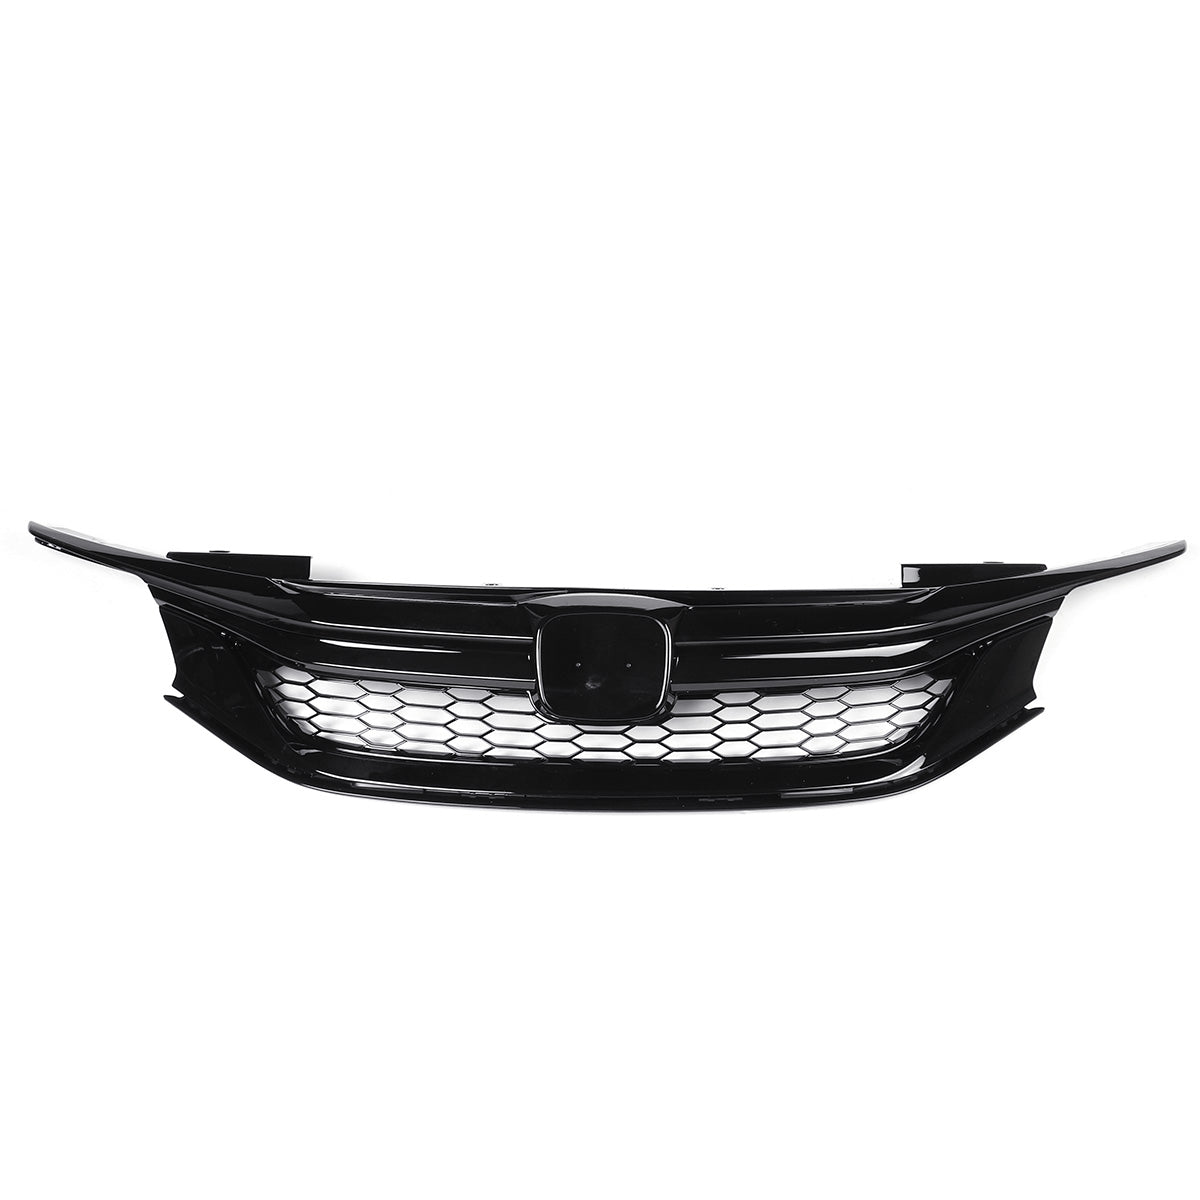 Black Sport Style Front Car Grille Front Bumper For 16-17 9th Gen HD Accord Sedan Glossy Black JDM